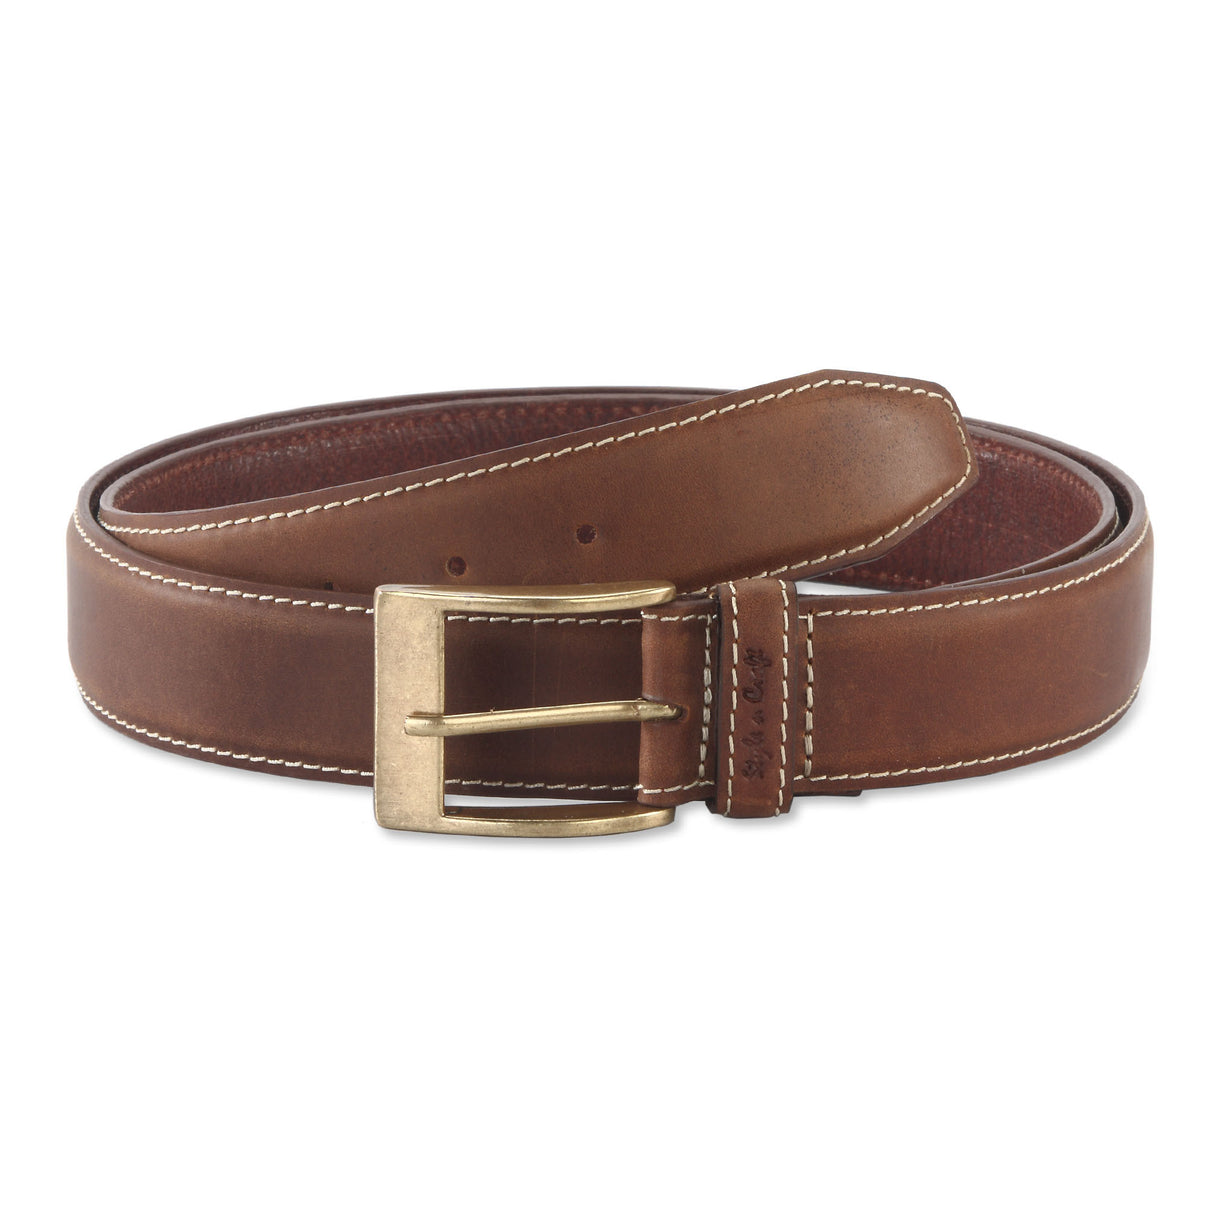 Leather Belt in Brown Color | Style n Craft | #391902